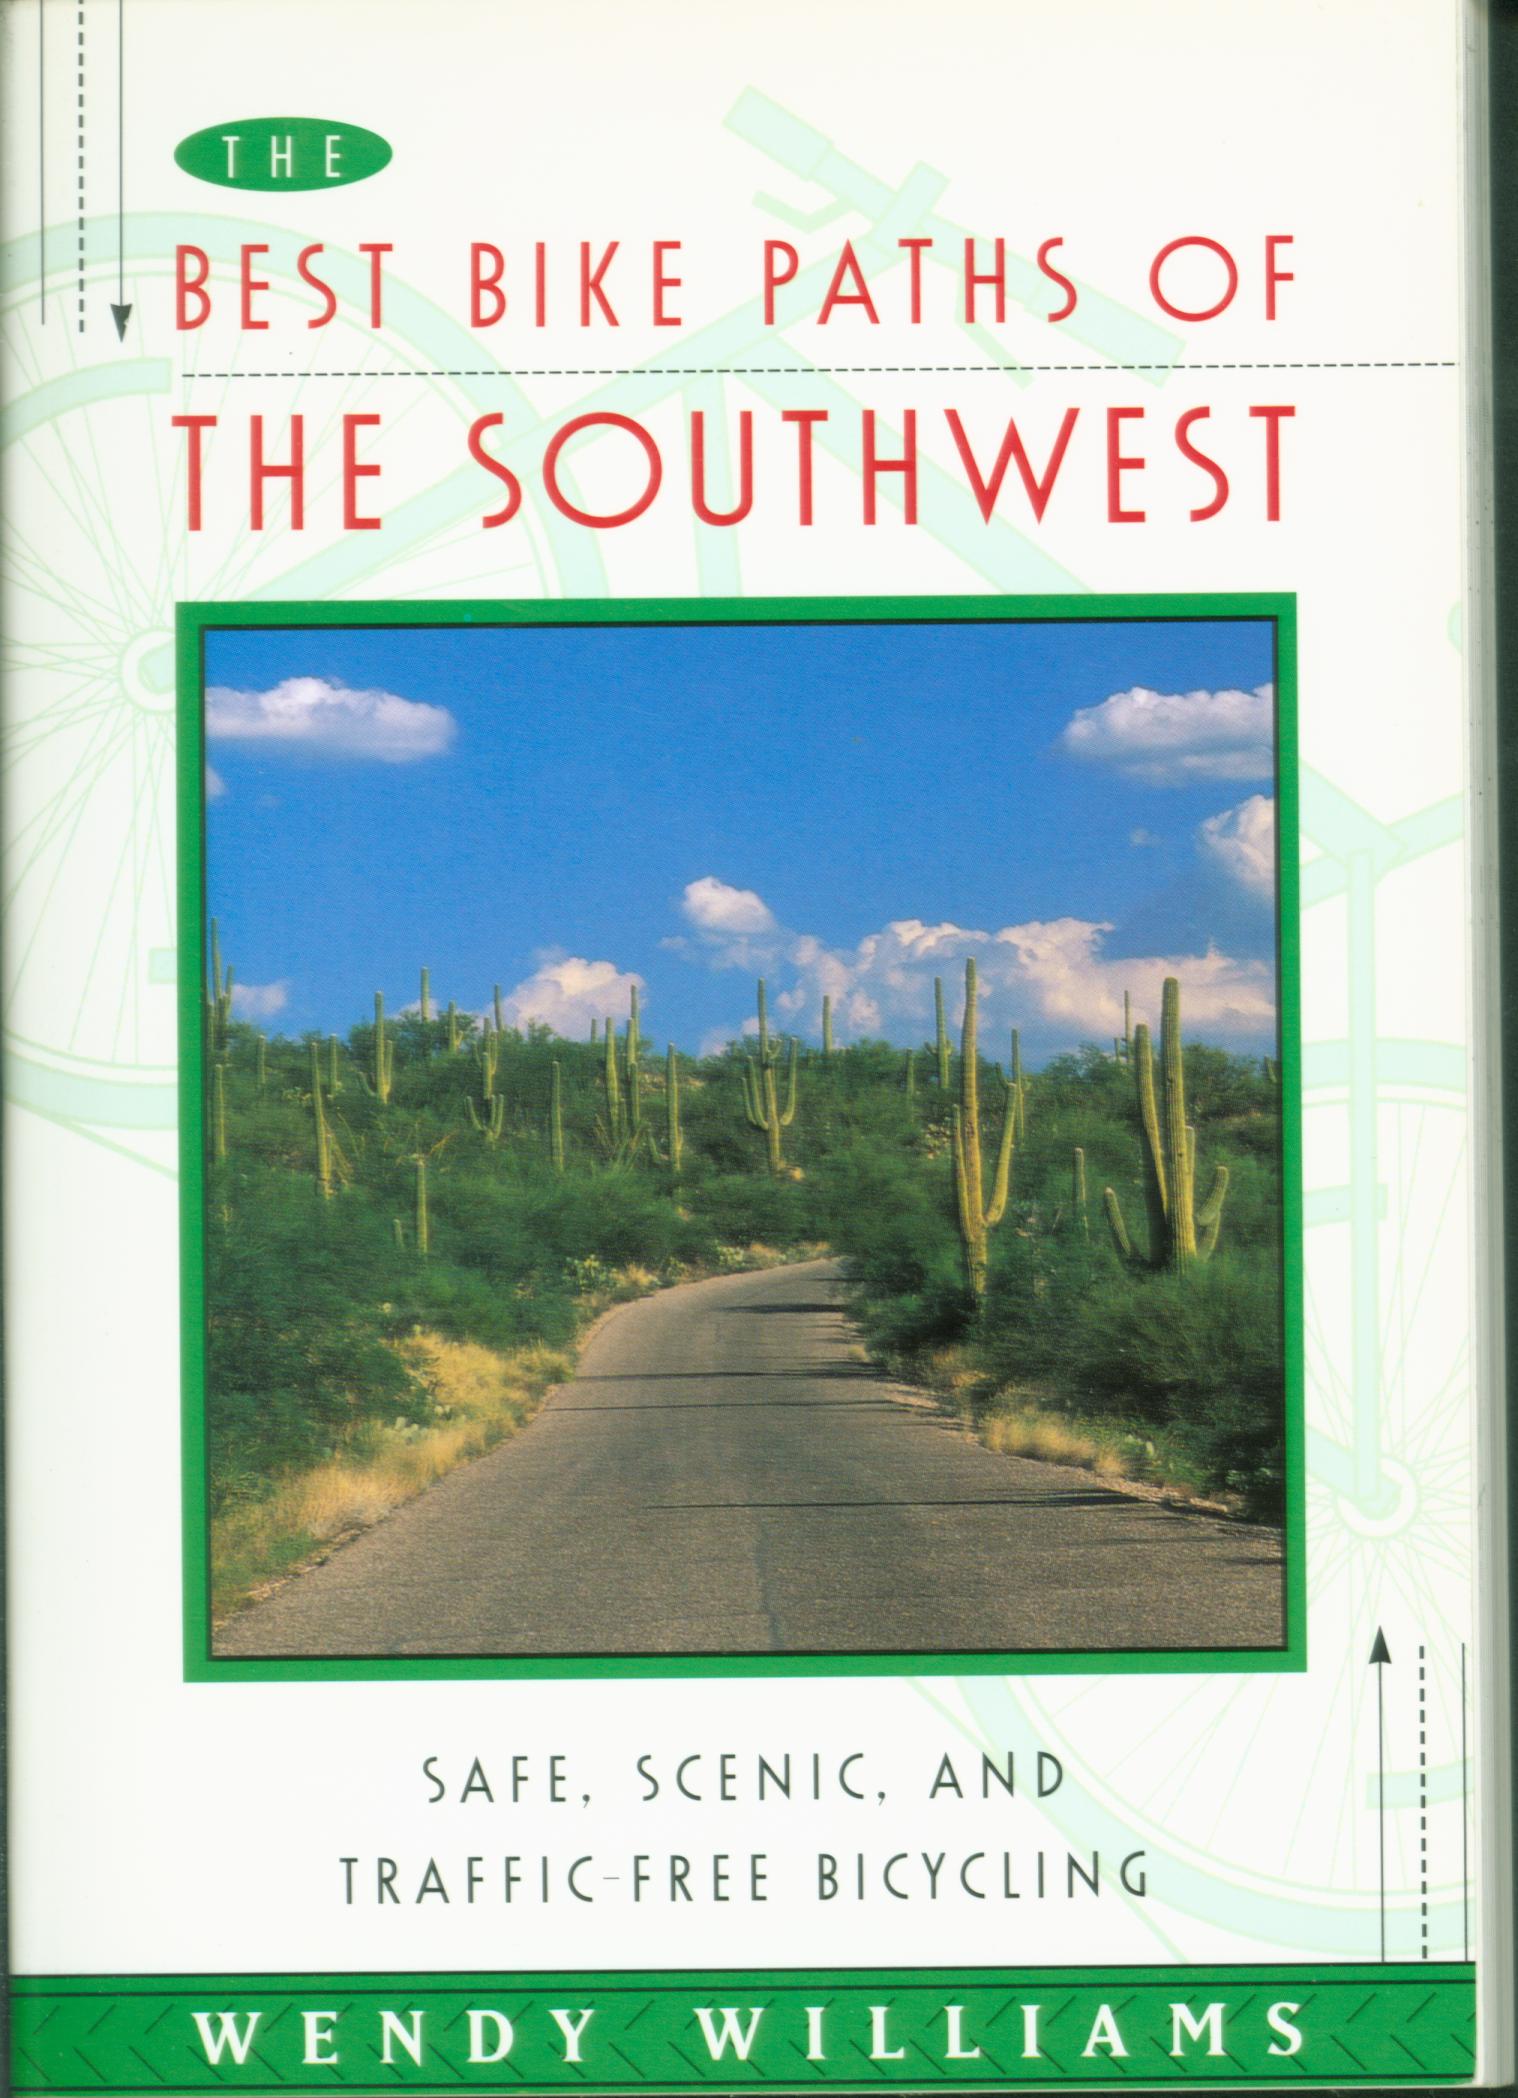 THE BEST BIKE PATHS OF THE SOUTHWEST.